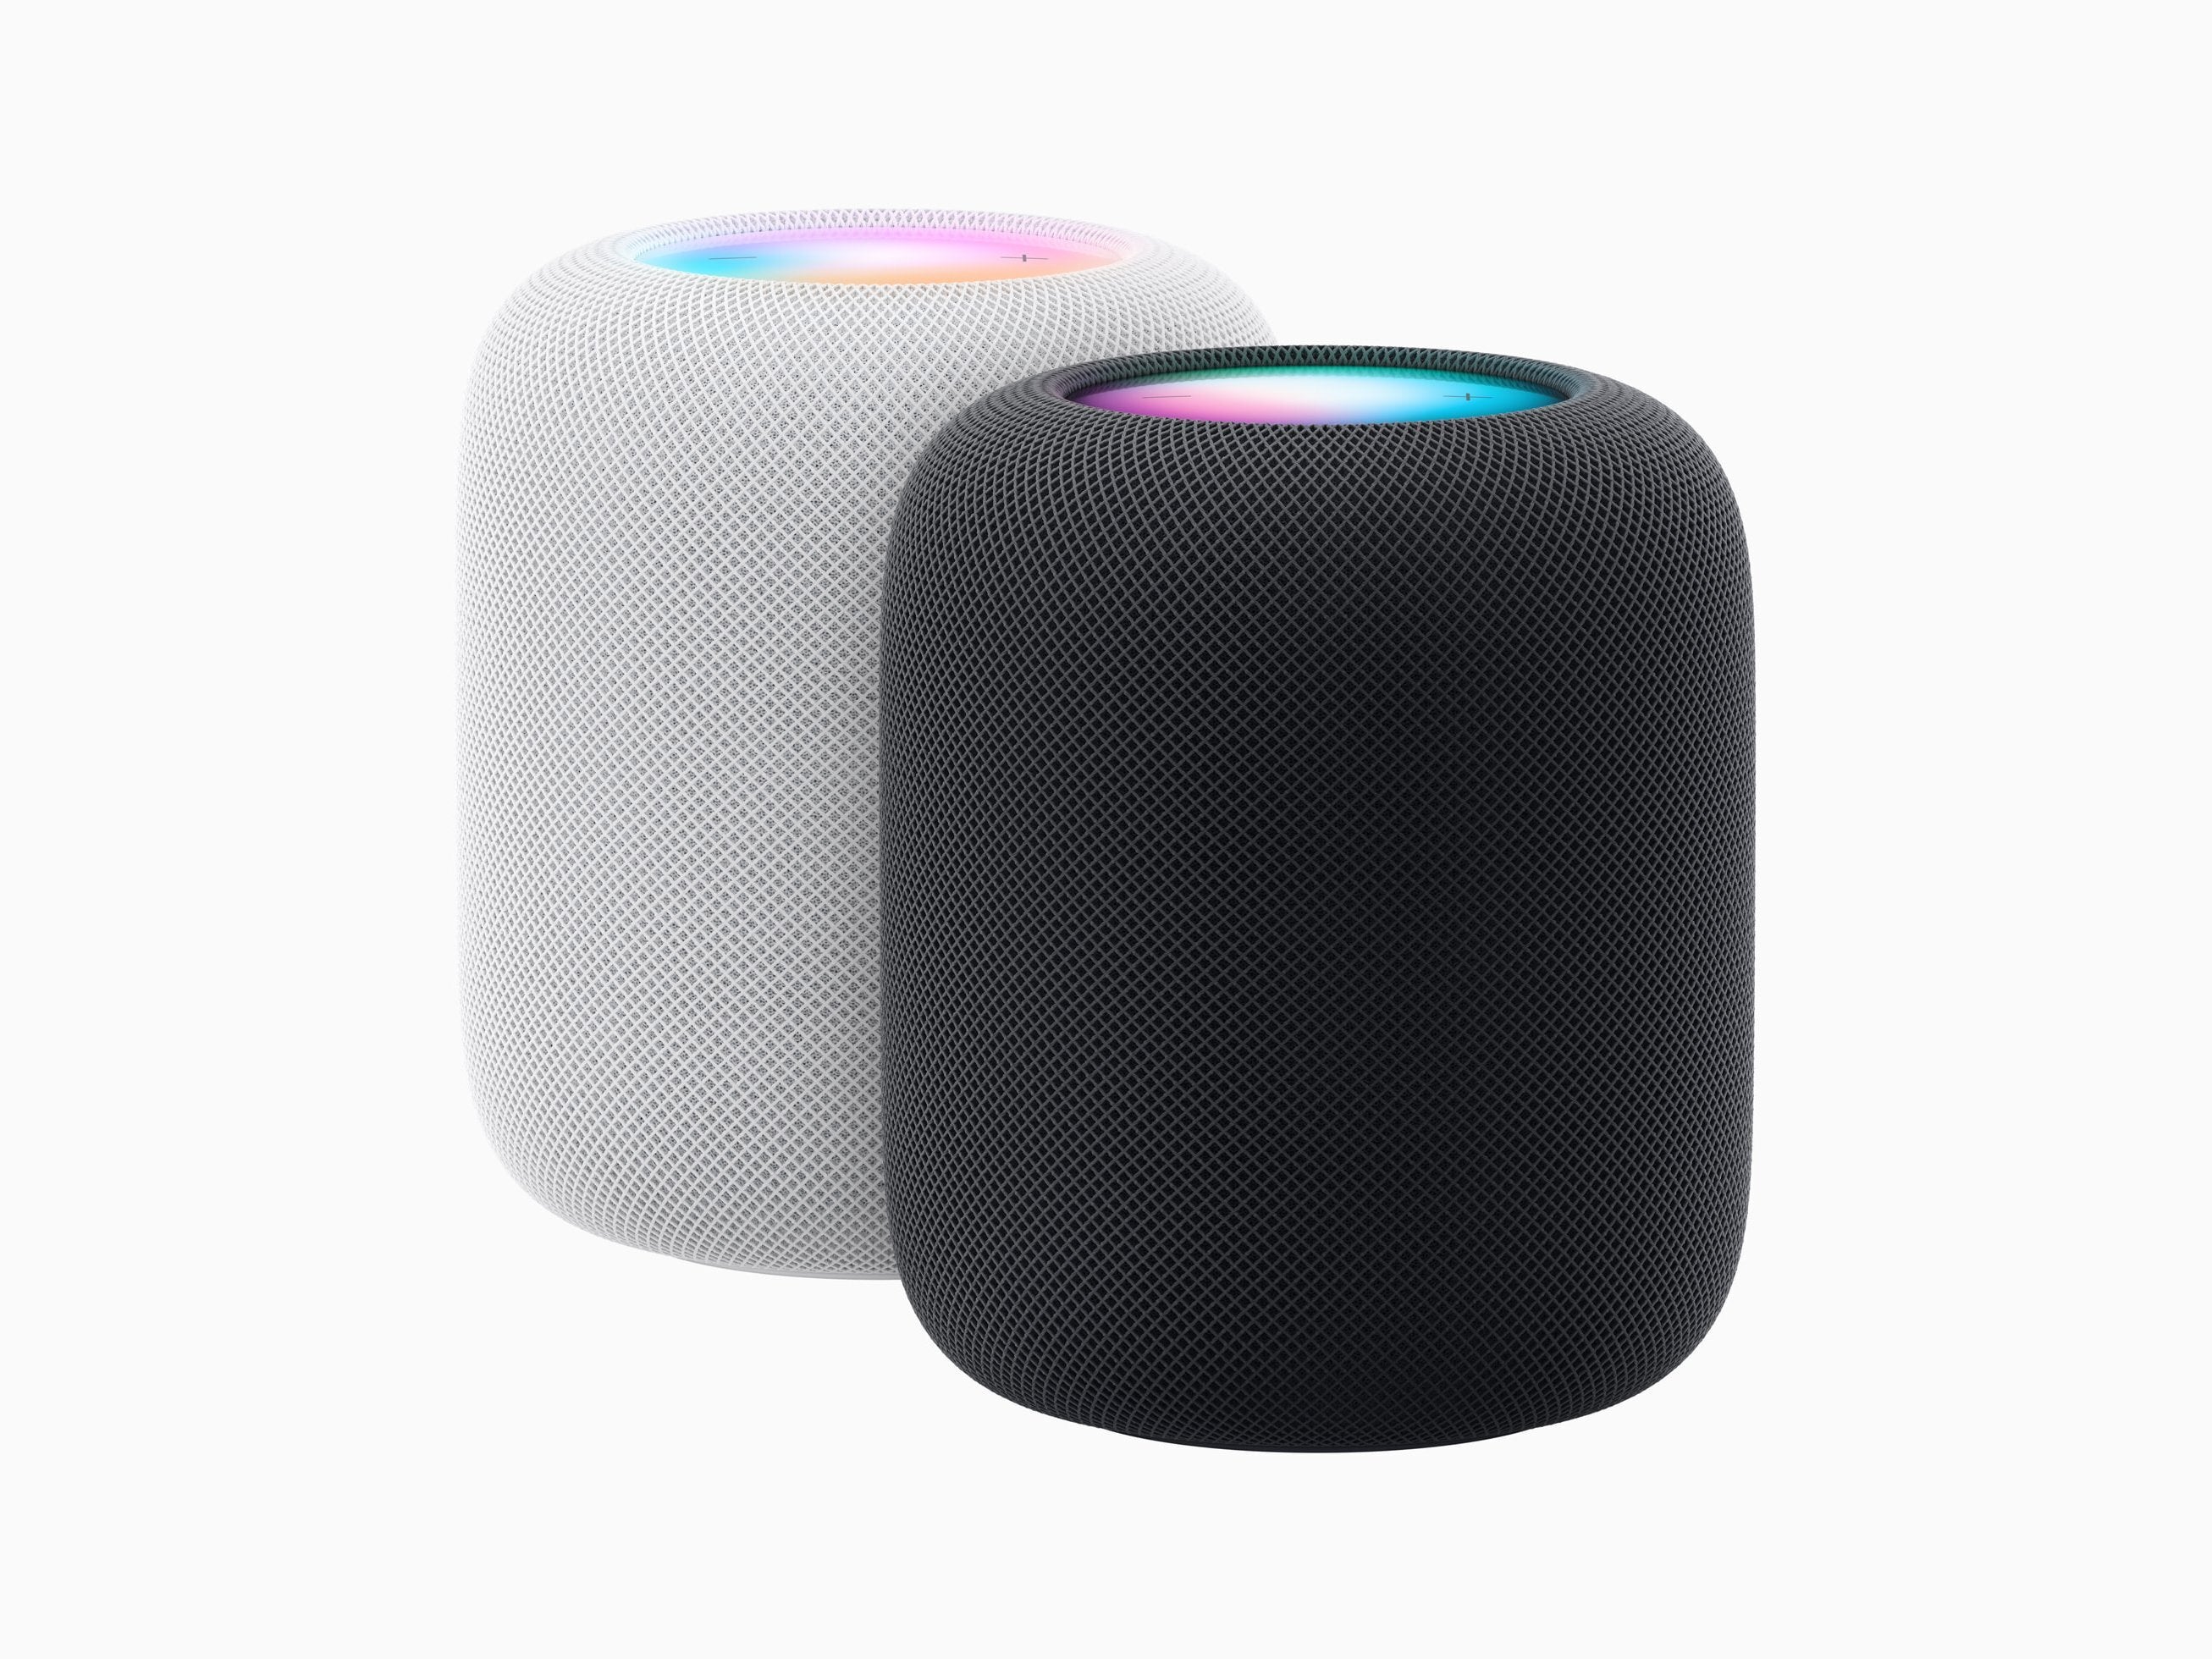 The HomePod is going to go up for sale in either White or Midnight. - Apple’s latest HomePod is smarter, louder and better sounding than ever